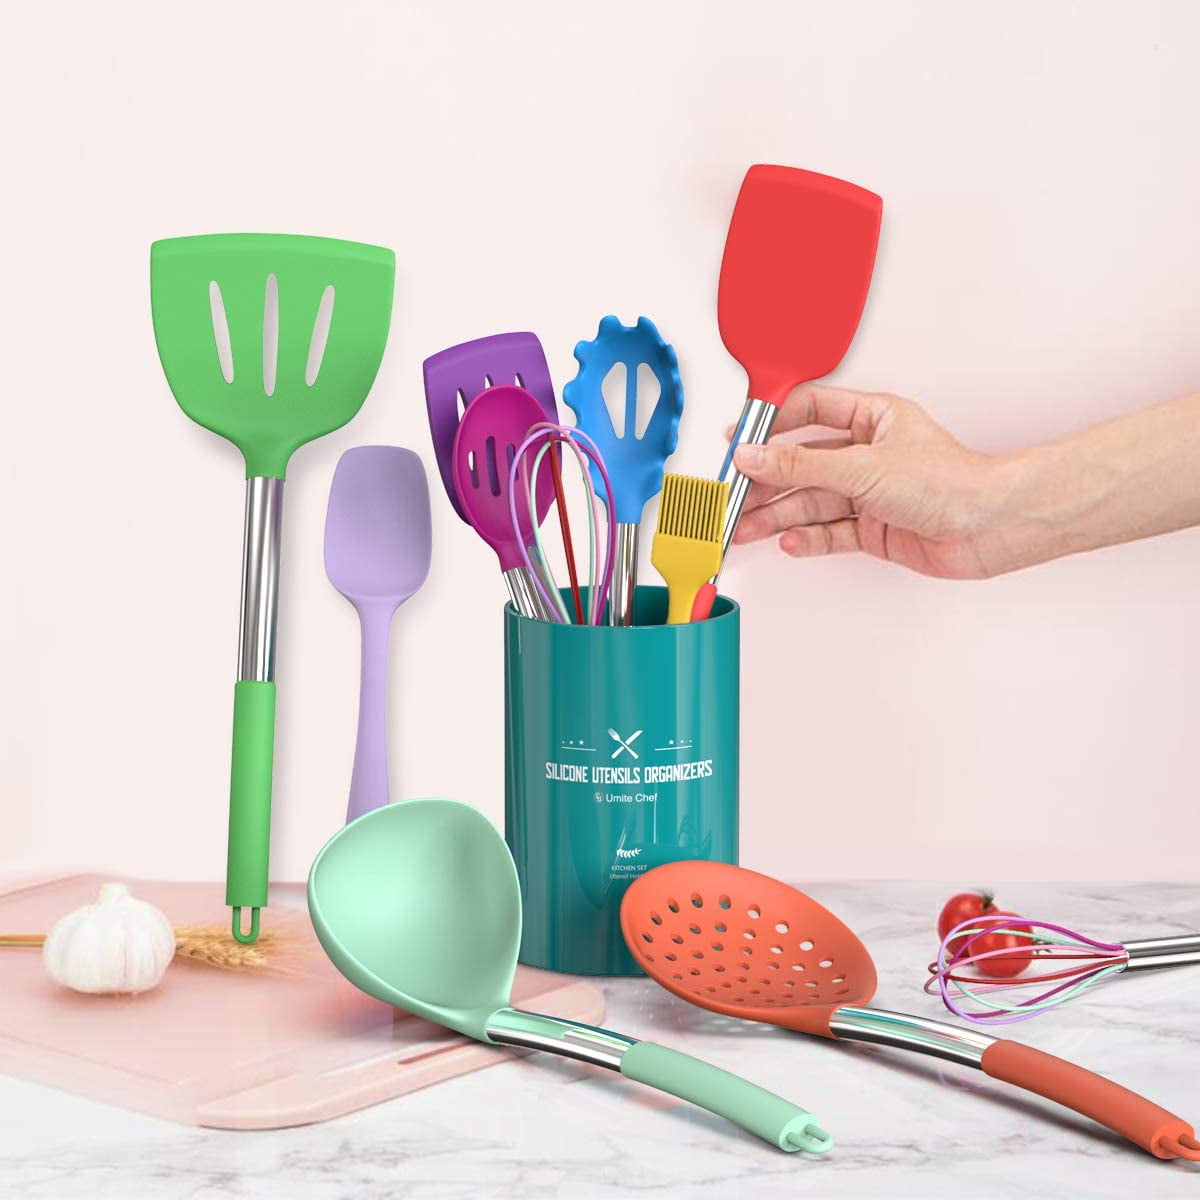 Silicone Cooking Utensil Set,Umite Chef Kitchen Utensils 15pcs Cooking  Utensils Set Non-stick Heat Resistan BPA-Free Silicone